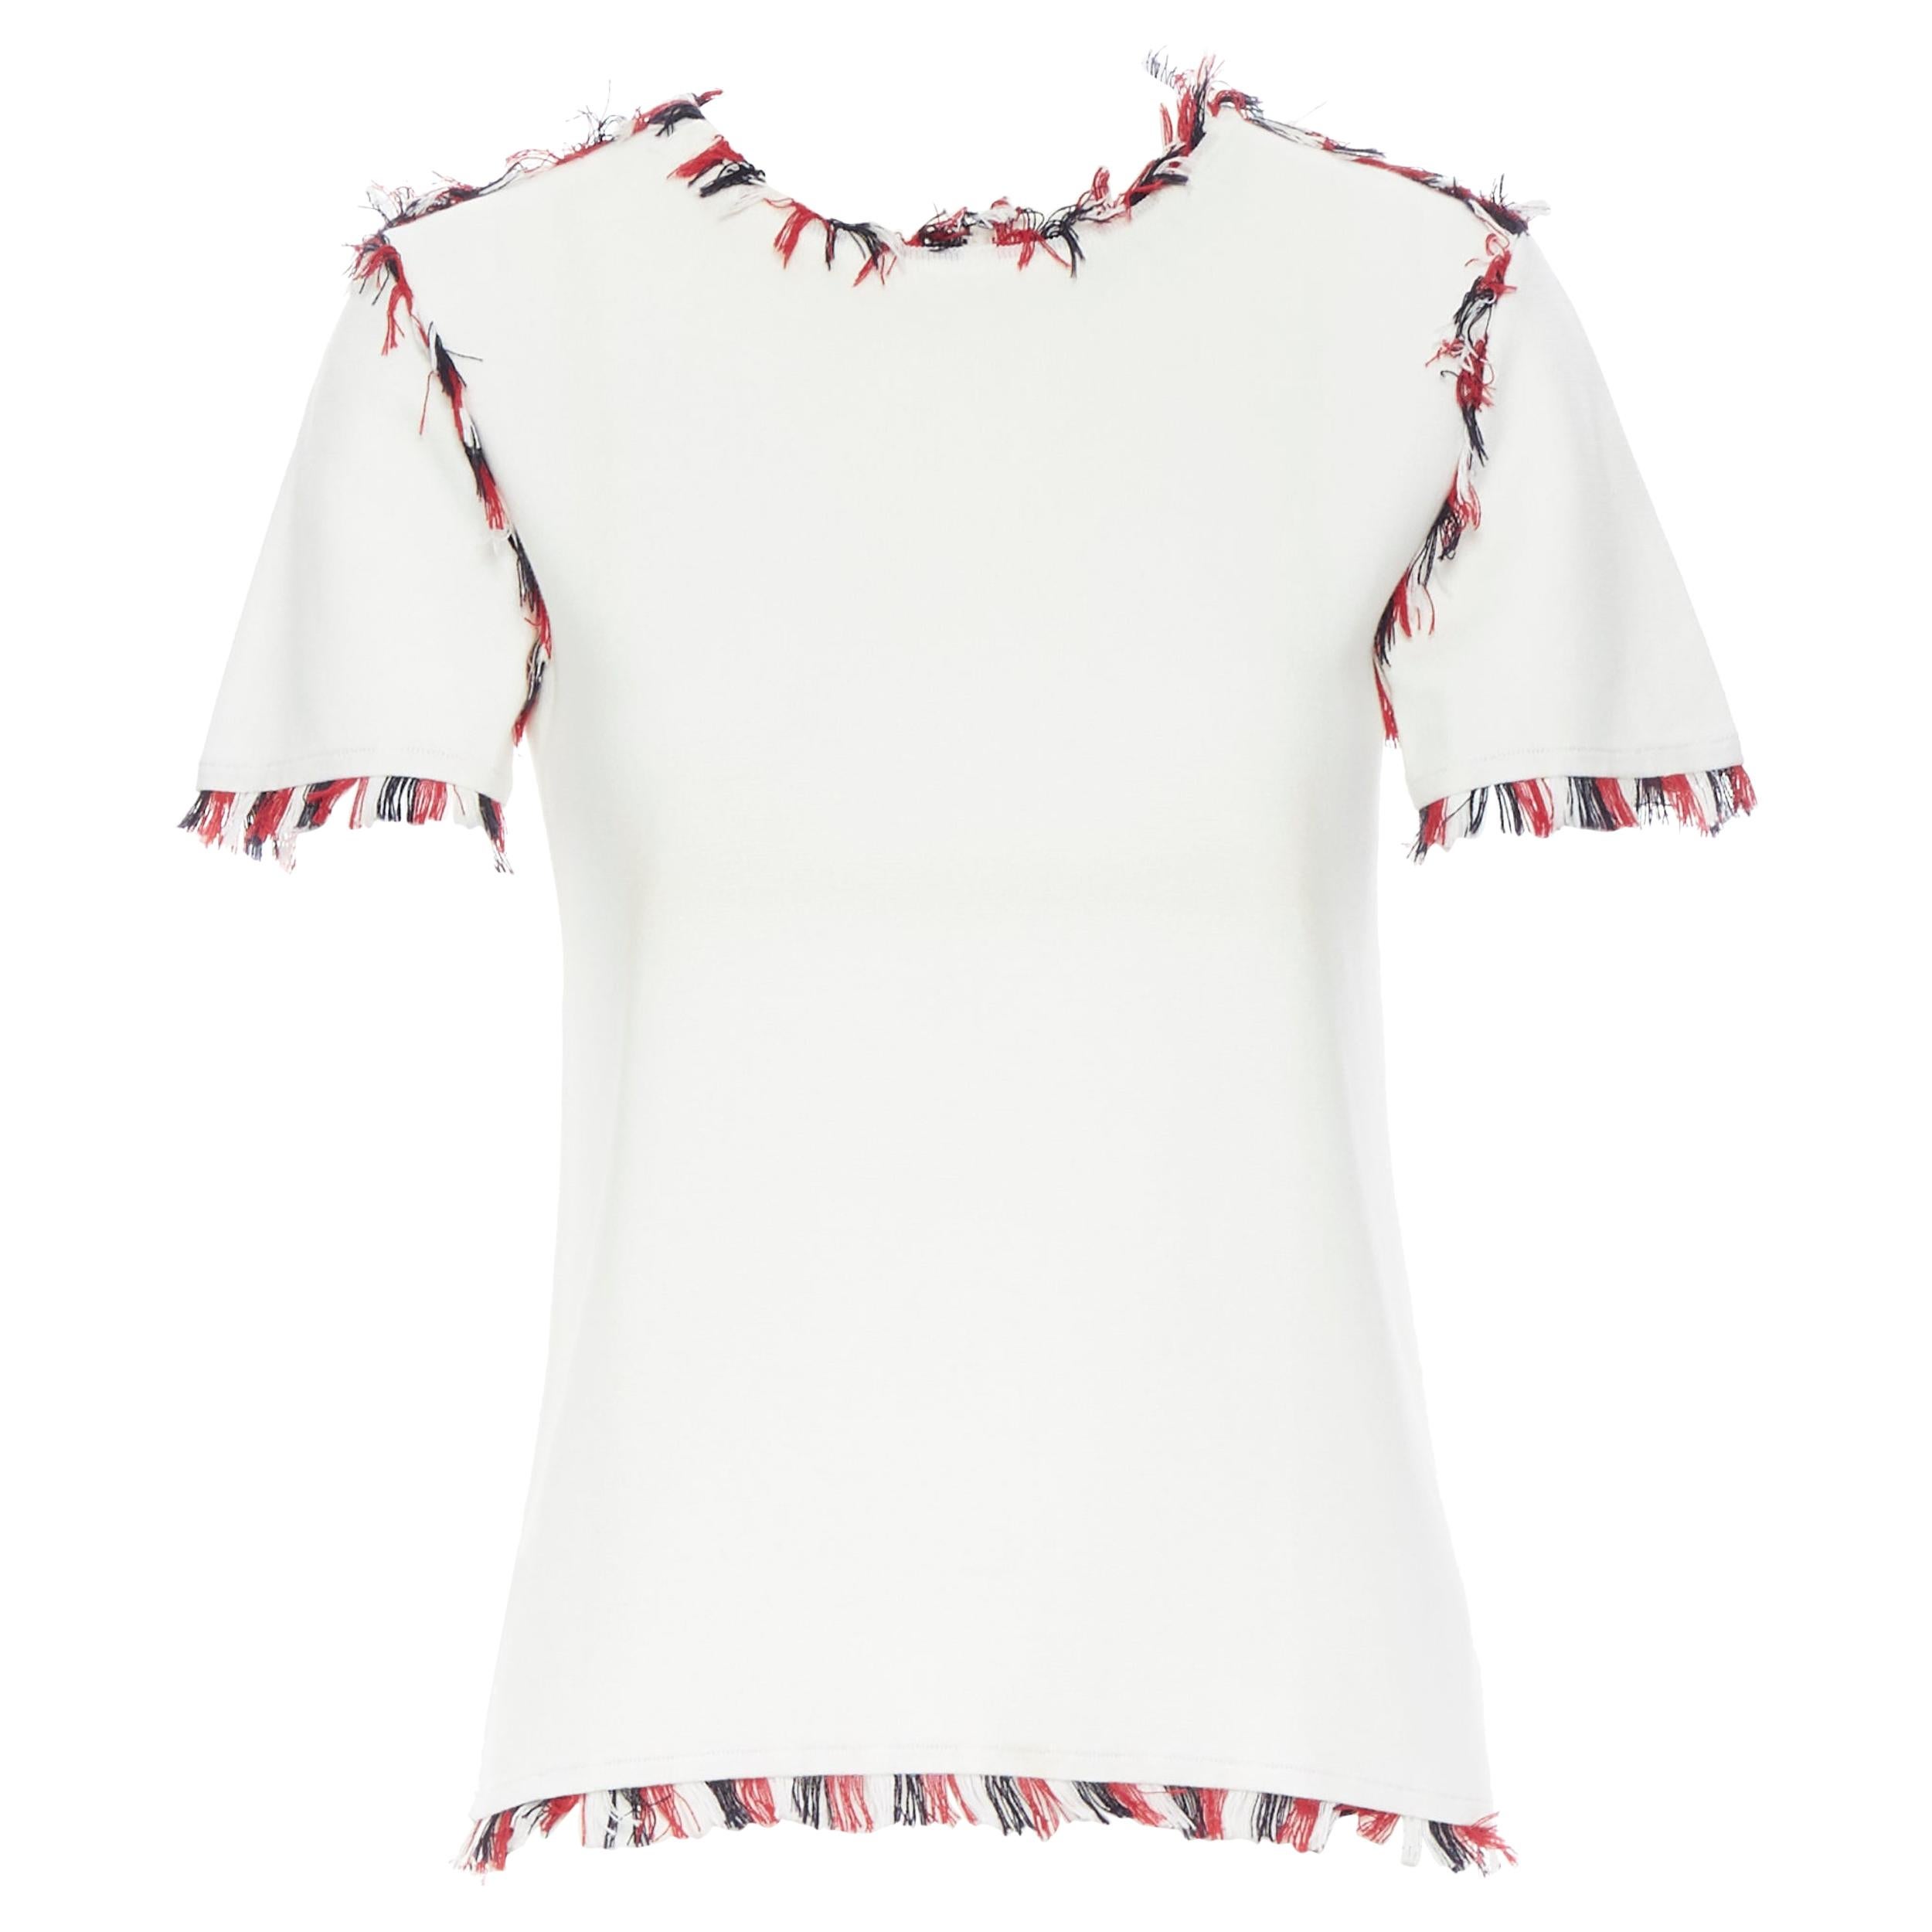 THOM BROWNE white cotton american red white blue fringe trim cotton top US0
Brand: Thom Browne
Designer: Thom Browne
Model Name / Style: Knitted top
Material: Cotton
Color: White
Pattern: Solid
Closure: Button
Extra Detail: Button closure at